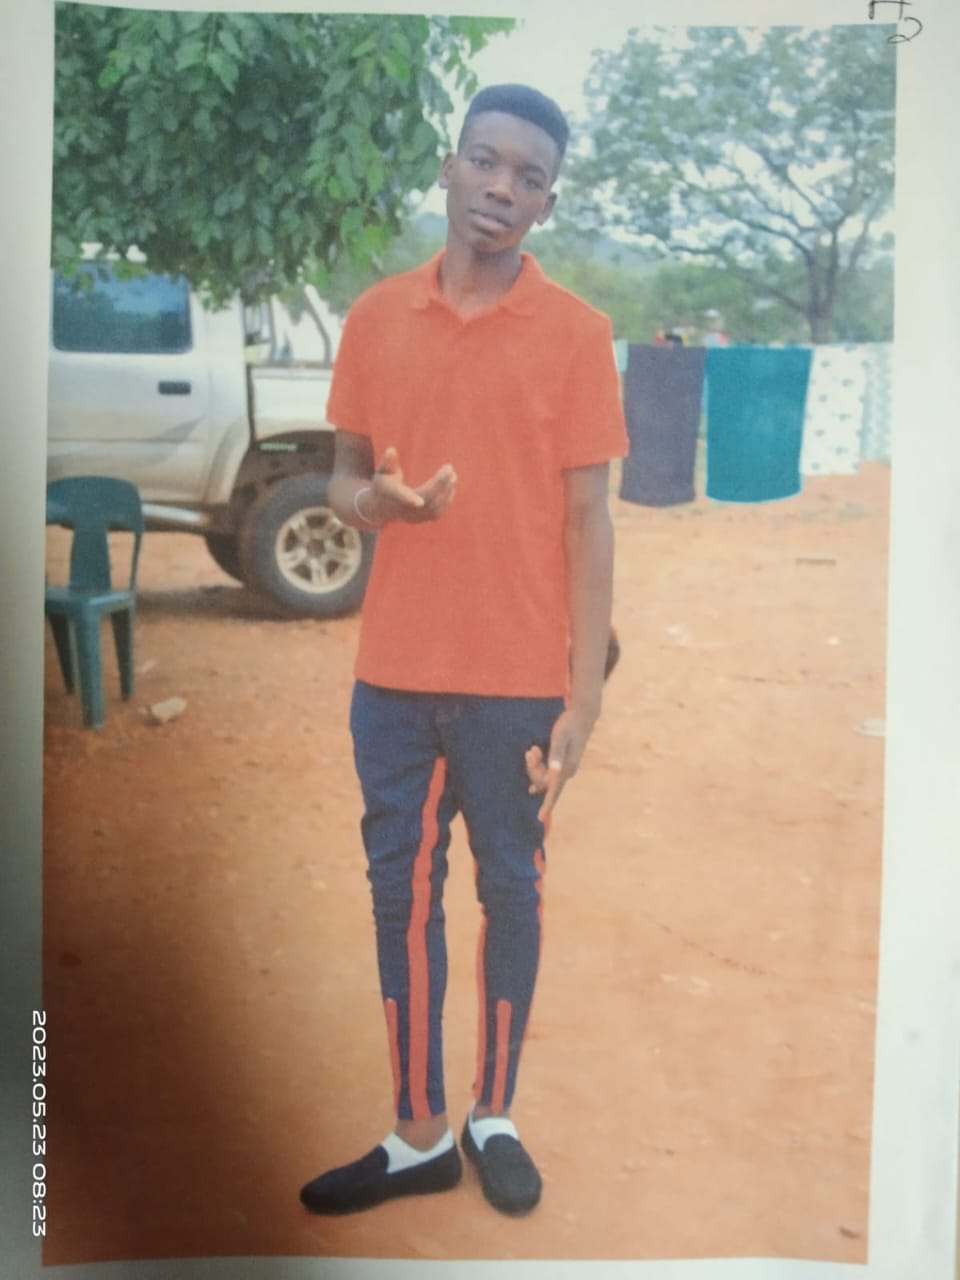 Giyani police request public assistance to locate a missing man aged 21